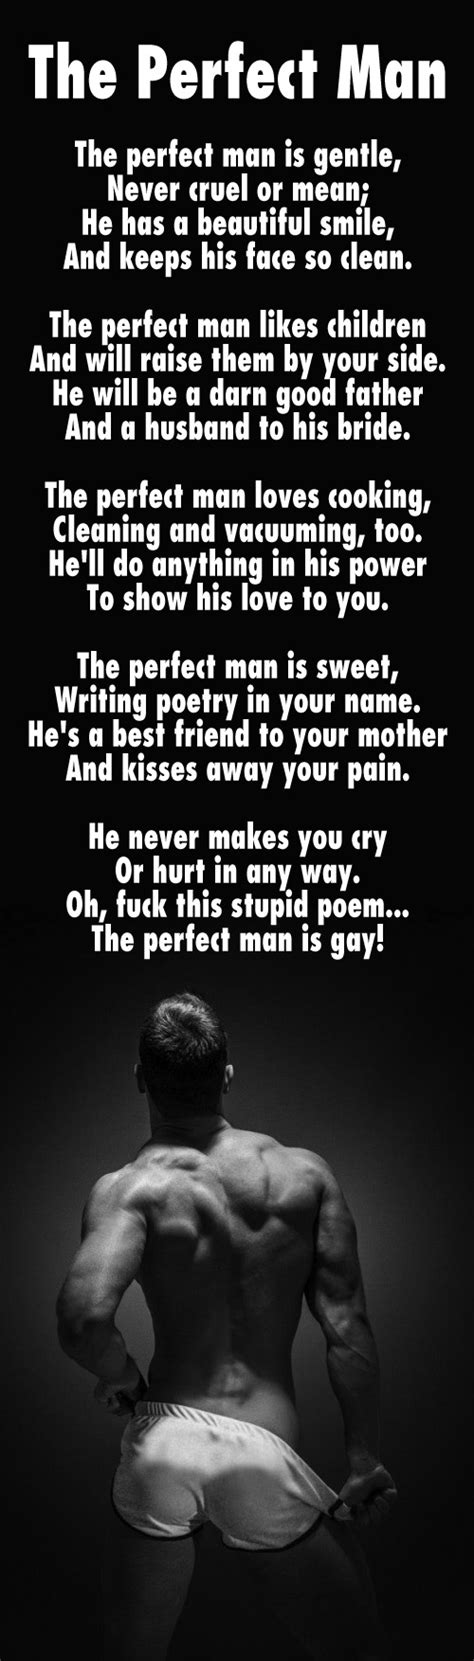 The Perfect Man Poem Gay Quotes Men Quotes Funny Love Quotes Inspirational Quotes Funny